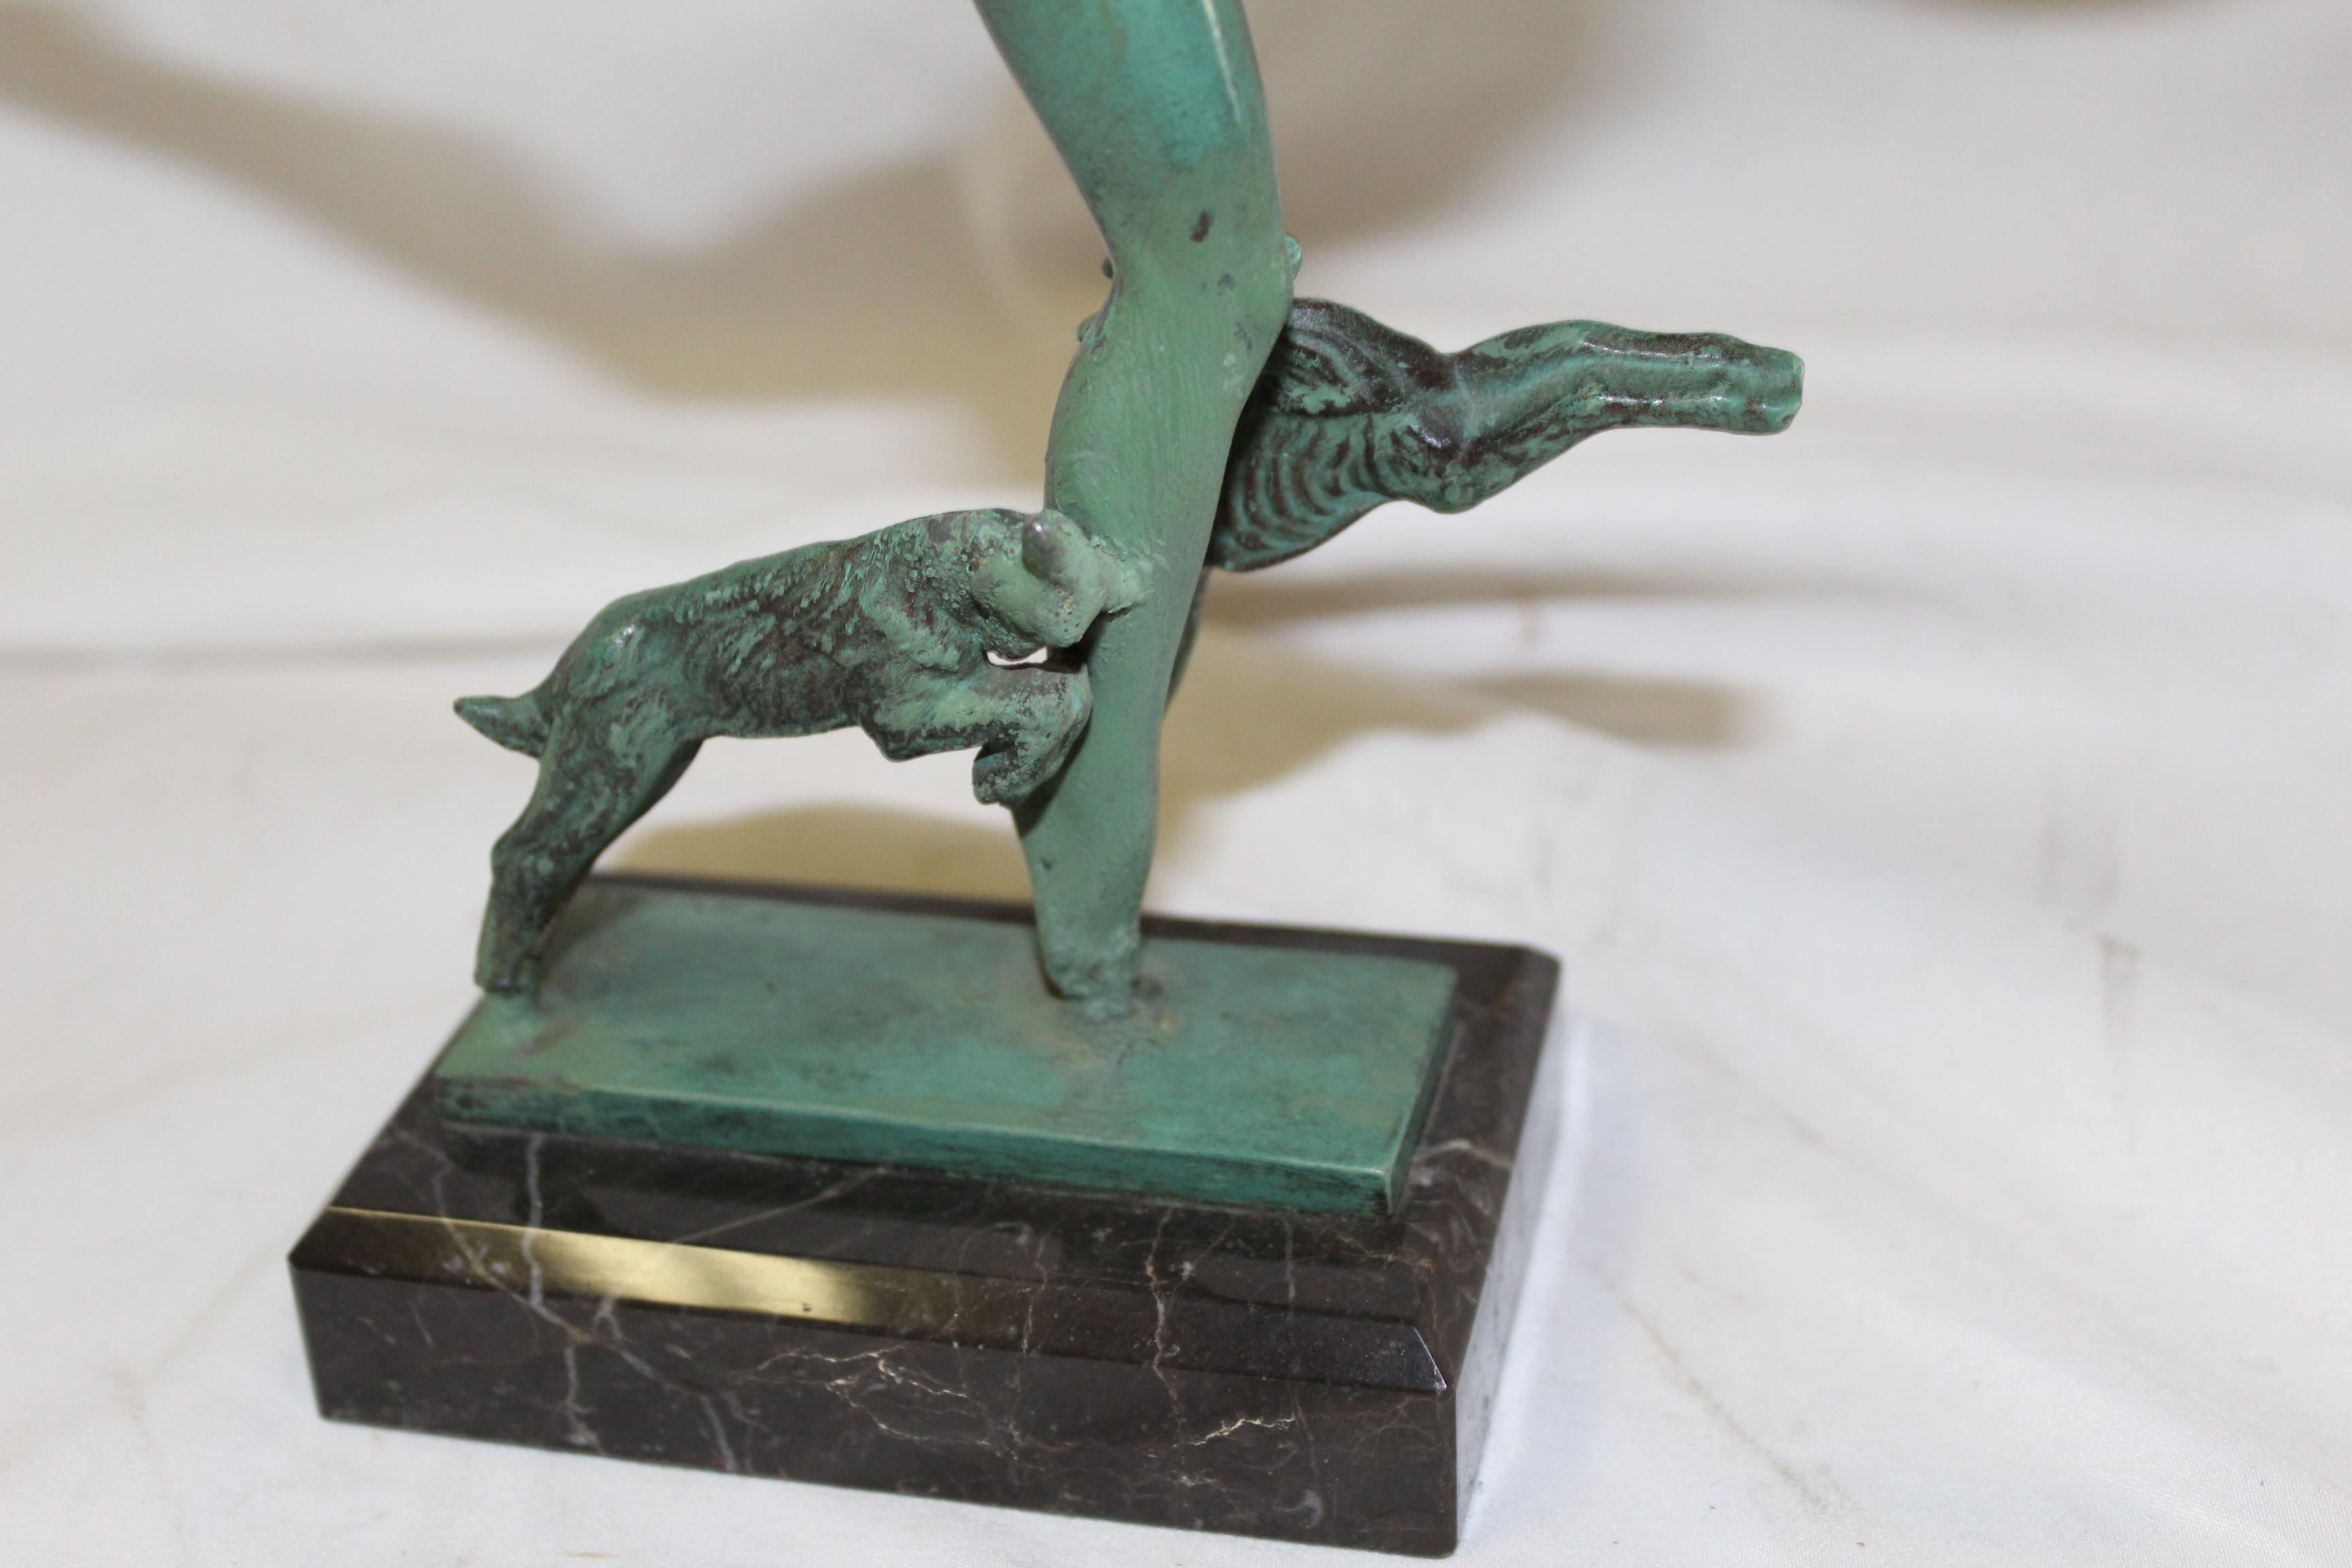 An Art Deco sculpture from the Max Le Verrier collection in France. Has the original green patina finish. Mounted on a marble base 4